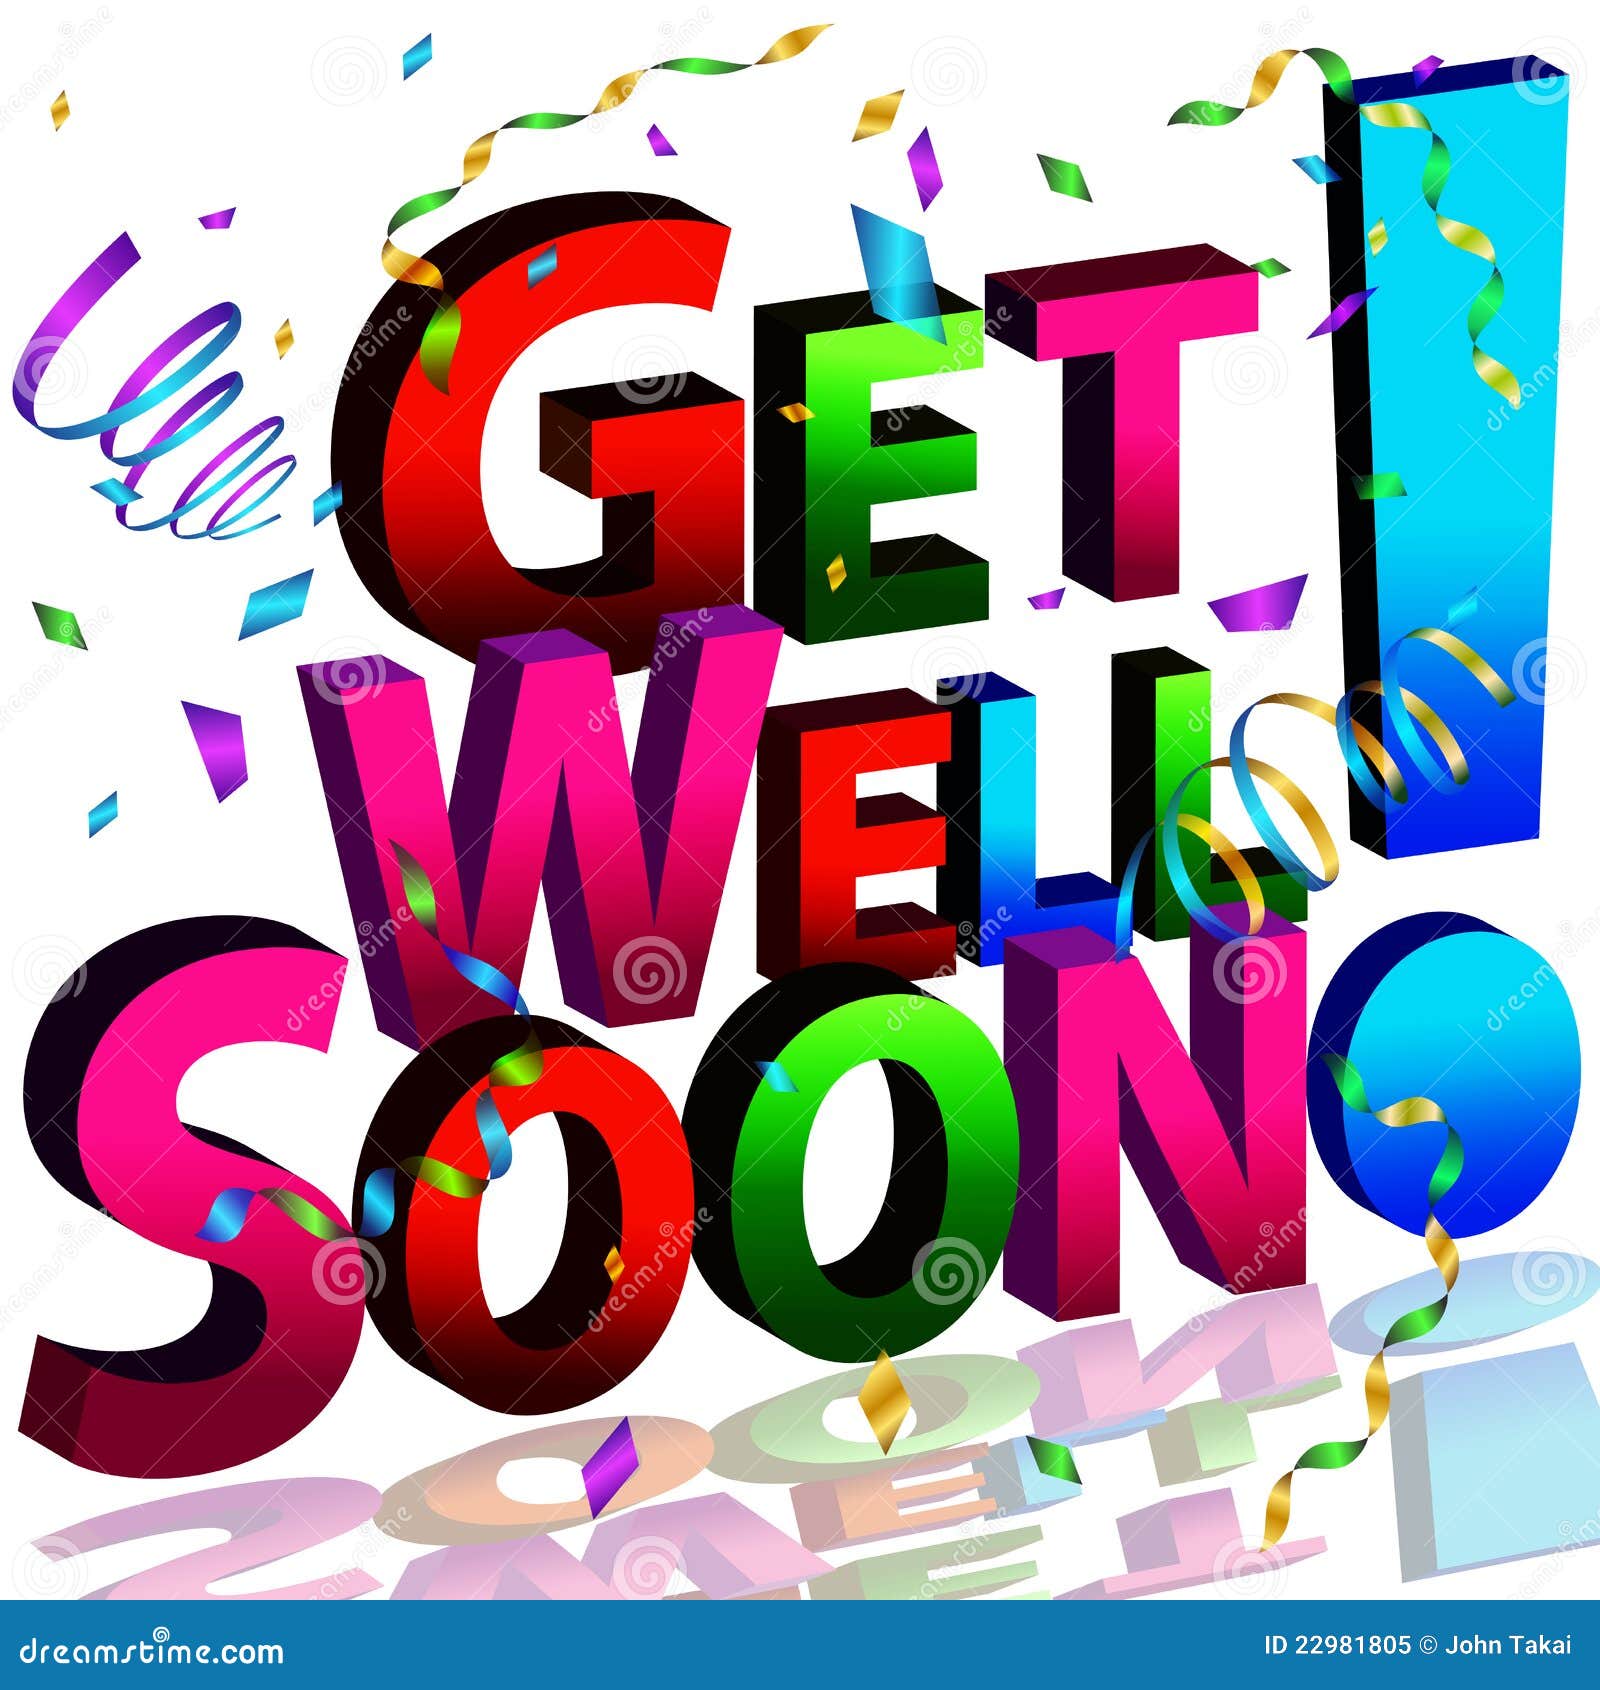 get well cards clipart - photo #27